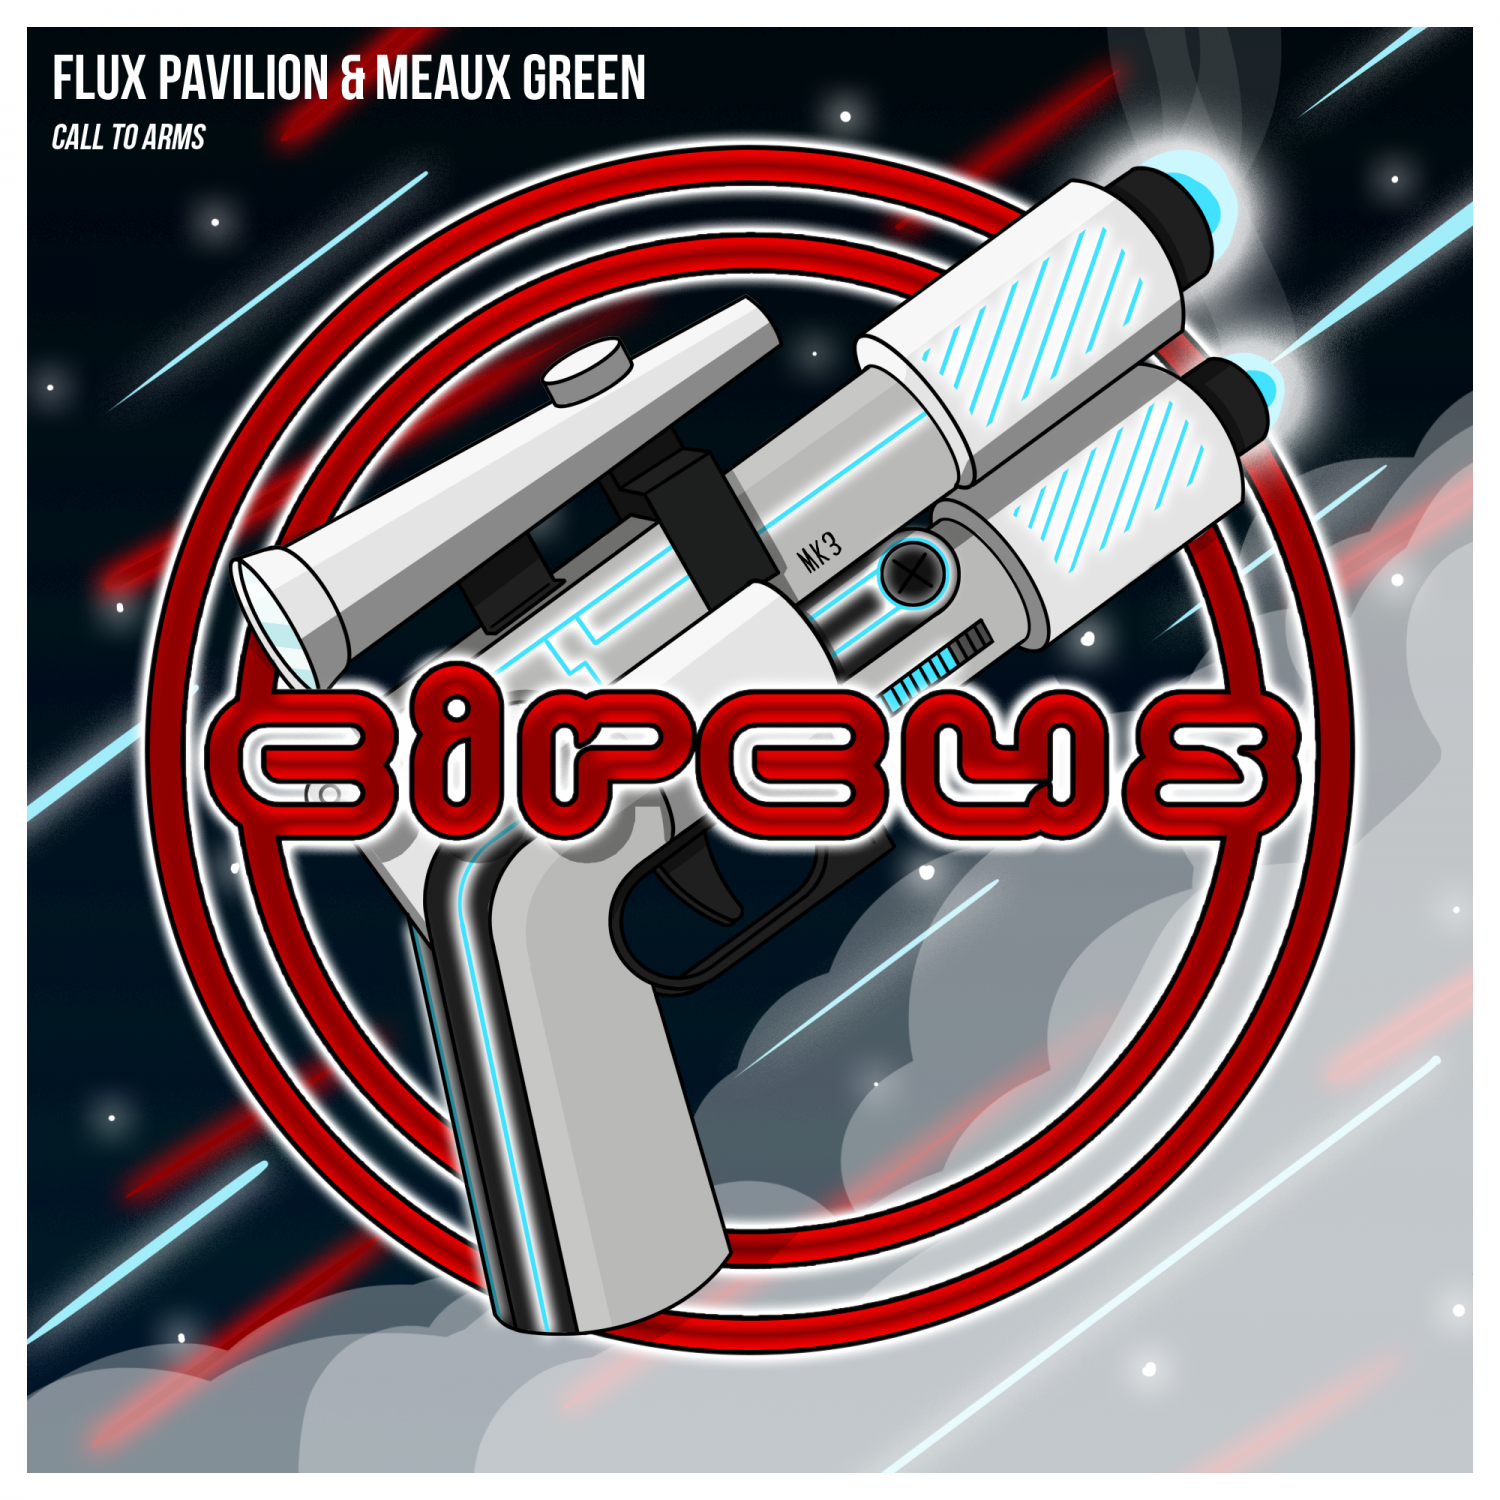 Flux Pavilion Meaux Green Call To Arms Circus Records